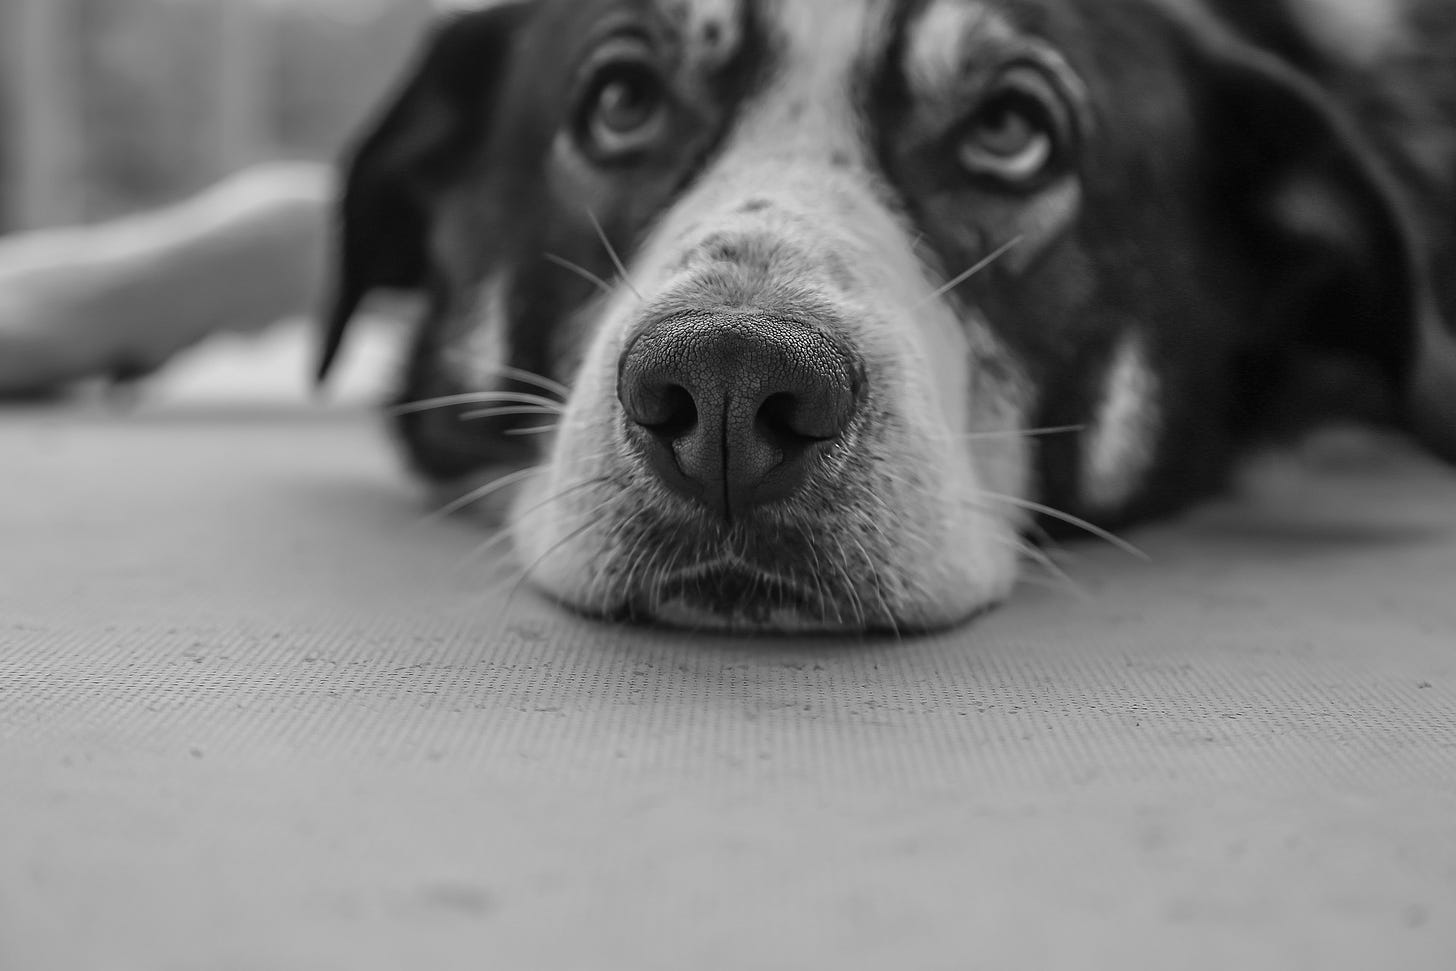 A black and white photo of a dog, with its face on the ground and looking pitifully up.